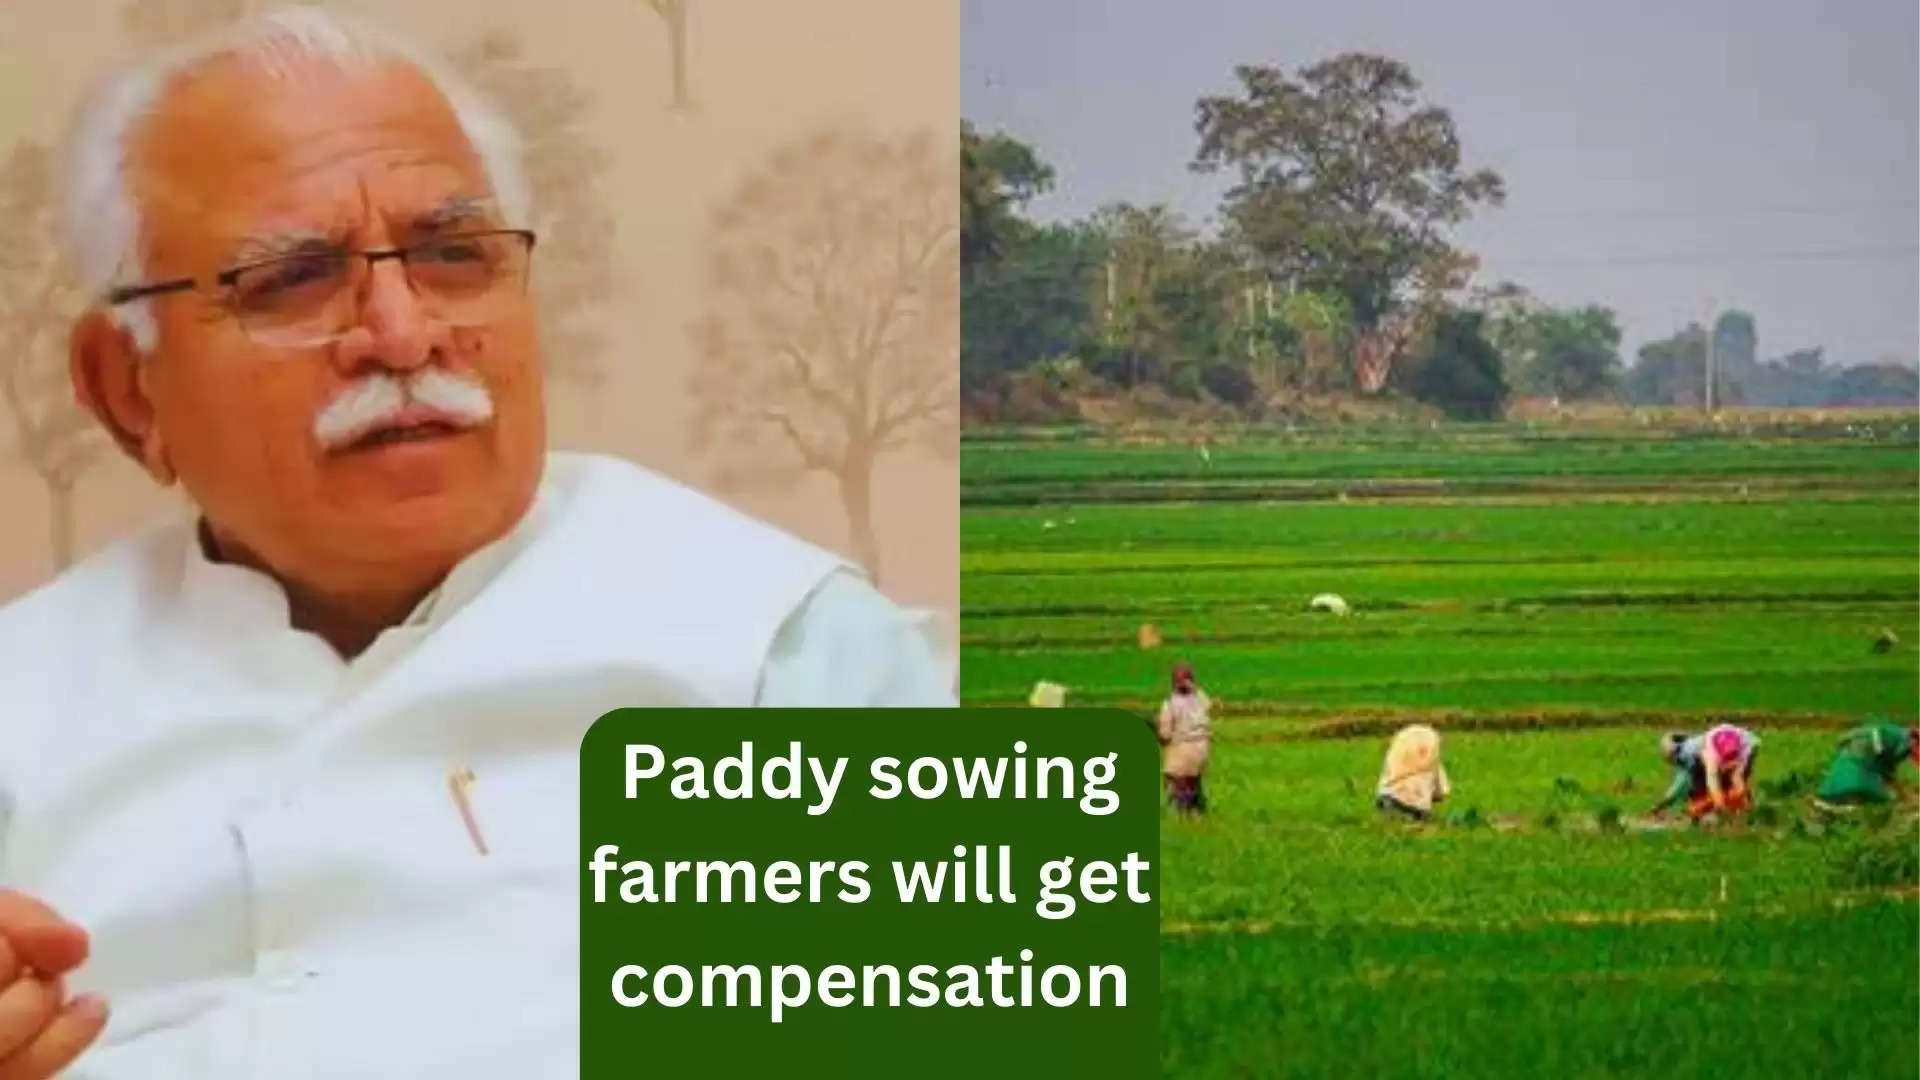 Paddy sowing farmers will get compensation